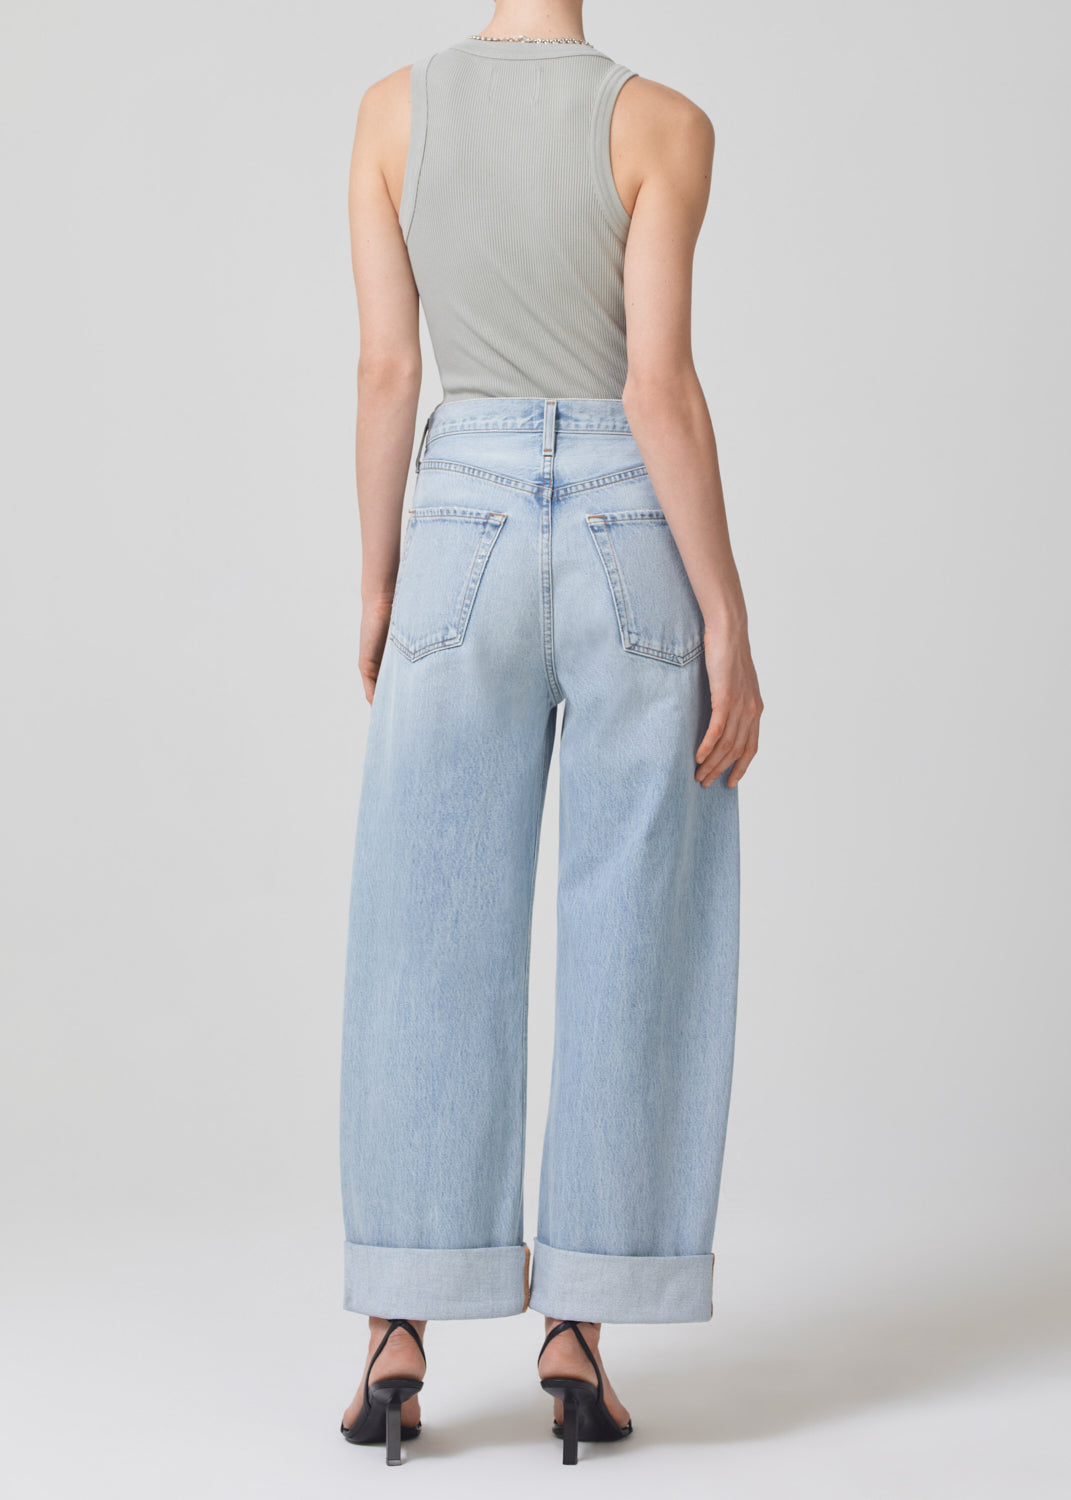 Ayla Baggy Cuffed Crop in Freshwater – Citizens of Humanity